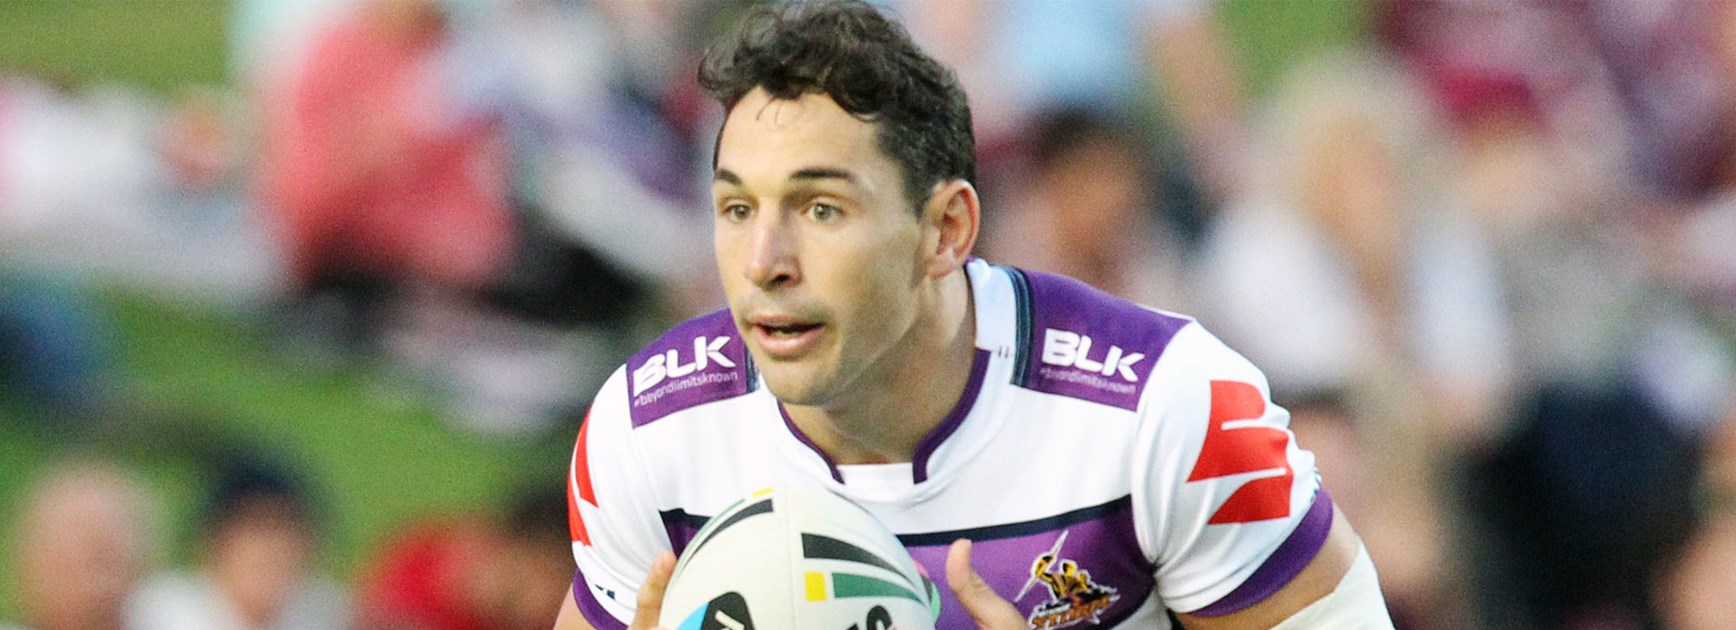 Billy Slater in action during Melbourne's Round 2 loss to Manly at Brookvale Oval.